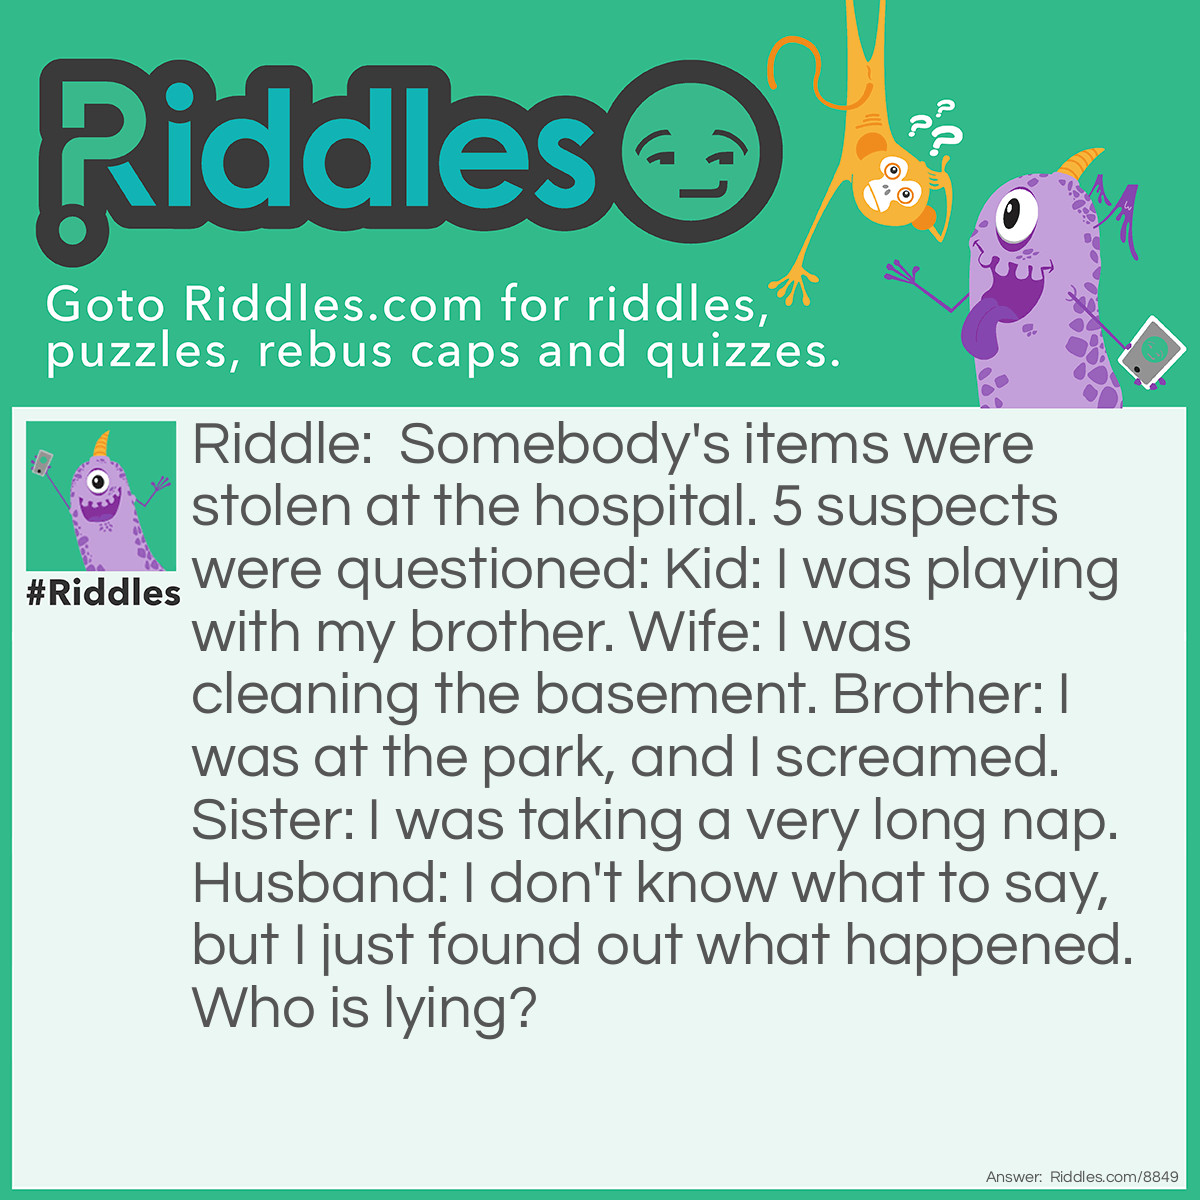 Riddle: Somebody's items were stolen at the hospital. 5 suspects were questioned: Kid: I was playing with my brother. Wife: I was cleaning the basement. Brother: I was at the park, and I screamed. Sister: I was taking a very long nap. Husband: I don't know what to say, but I just found out what happened. Who is lying? Answer: The wife and brother. First of all, why would a wife clean a room? Second of all, who should scream when they don't see anything?